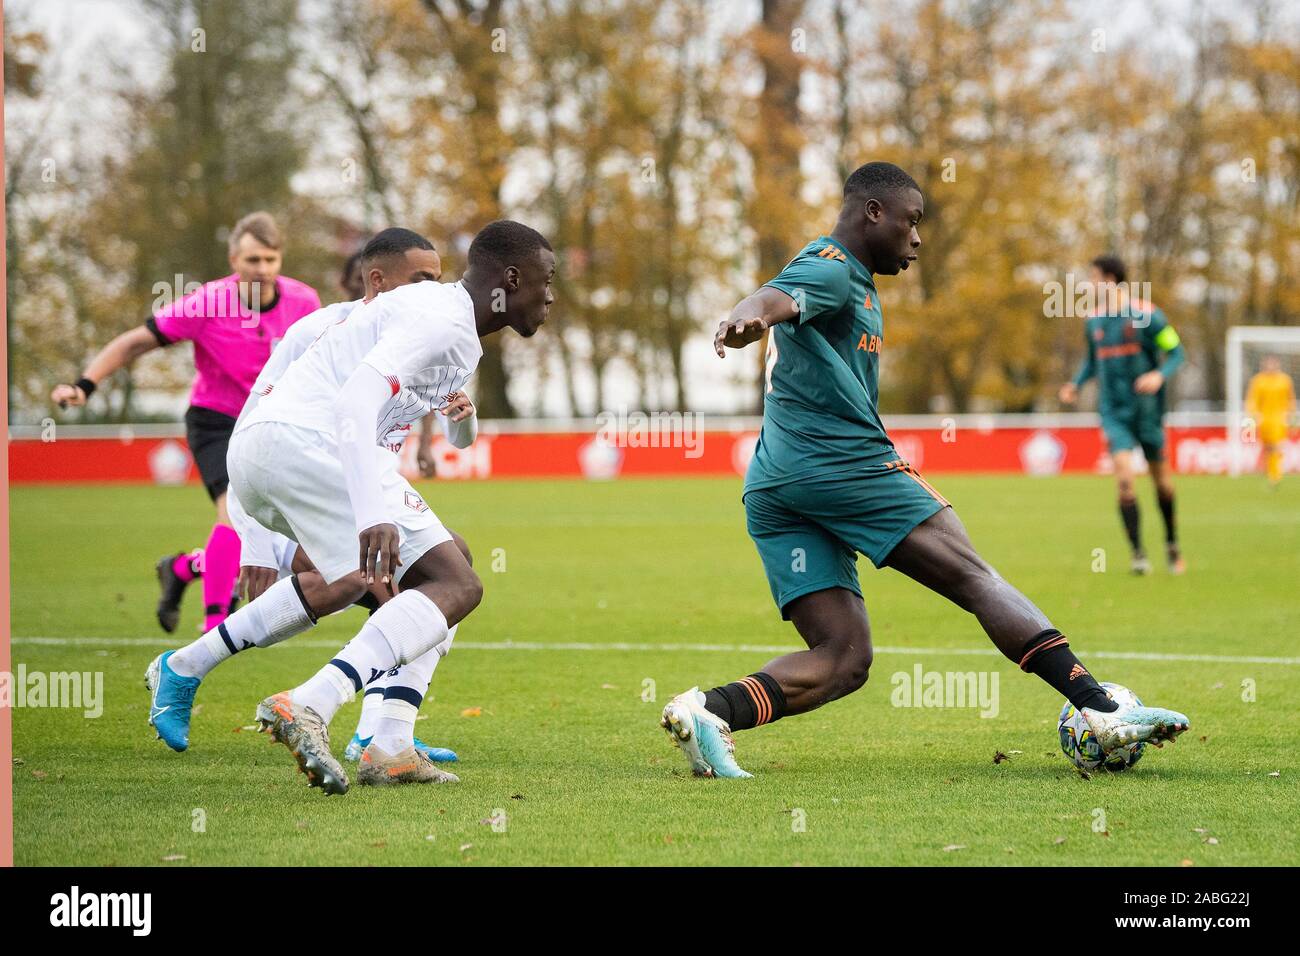 Lille, France. 27th Nov, 2019. LILLE, 27-11-2019, UEFA Youth League, season 2018/2019, LOSC Lille O19 player Abdoulaye Zakha Bangoura and Ajax O19 player Brian Brobbey during the match Lille O19 - Ajax O19 Credit: Pro Shots/Alamy Live News Stock Photo